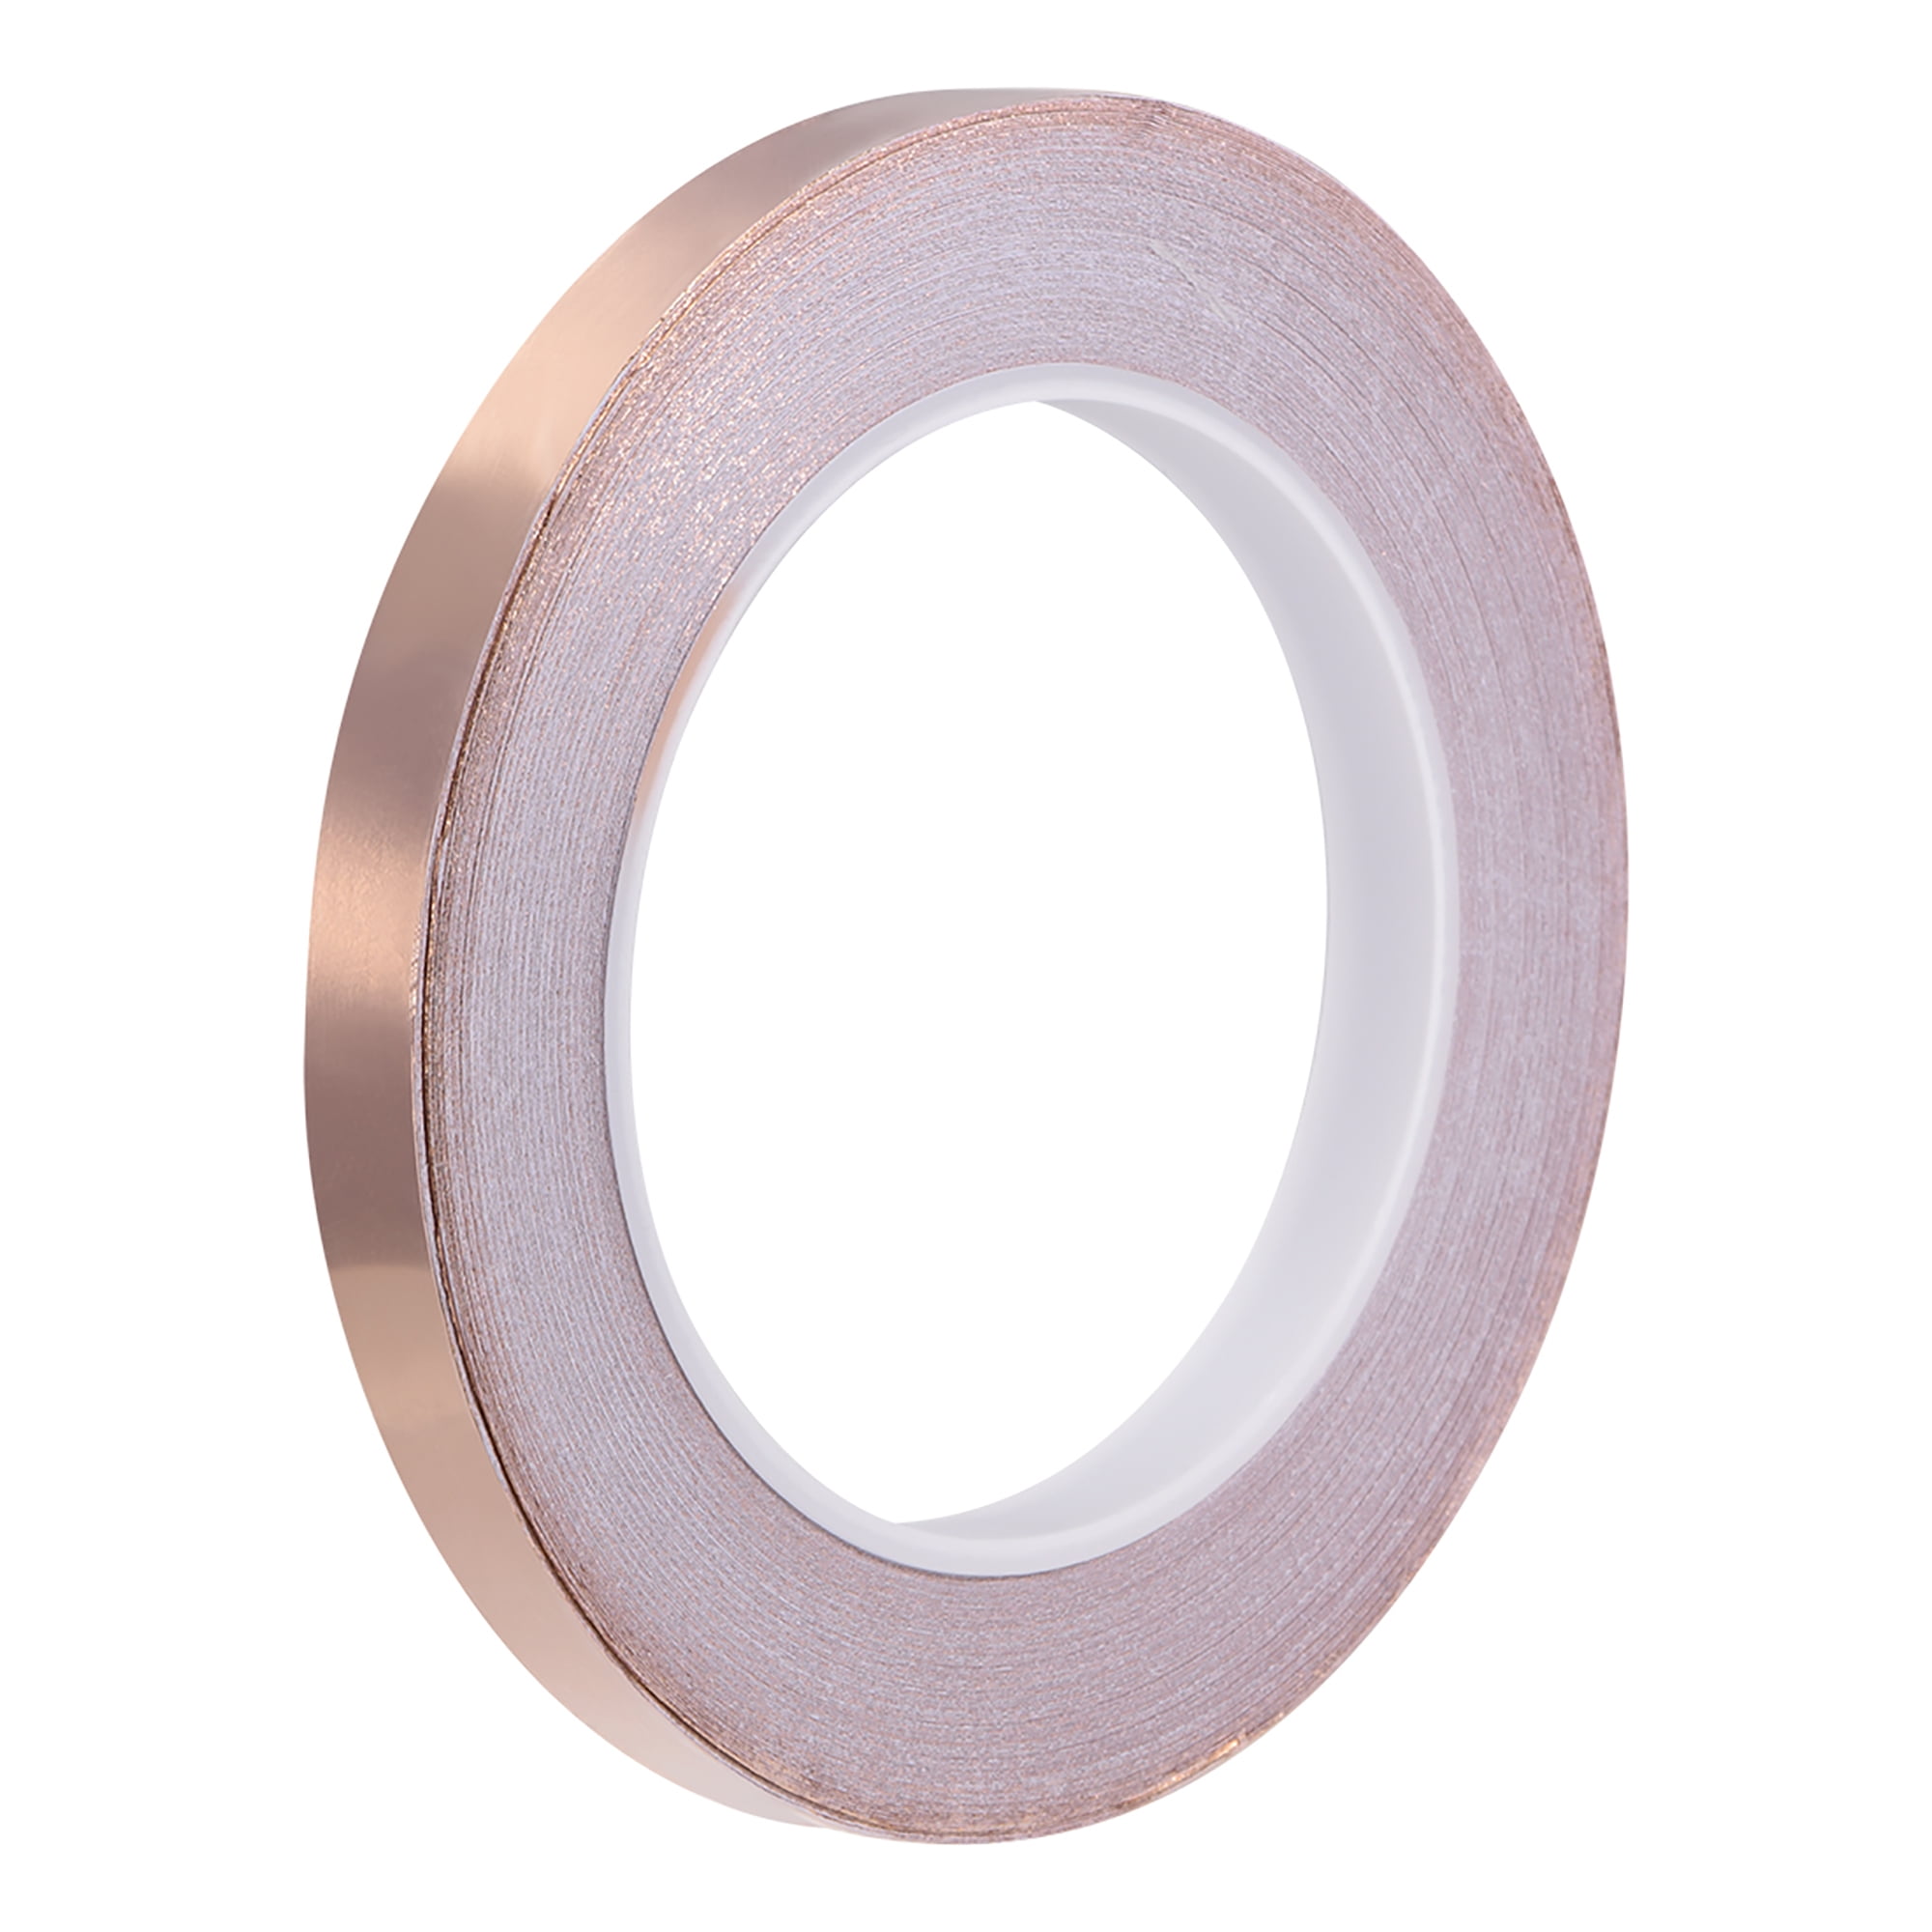 1 Roll Single Conductive COPPER FOIL TAPE 15MM X 30M with High Quality 